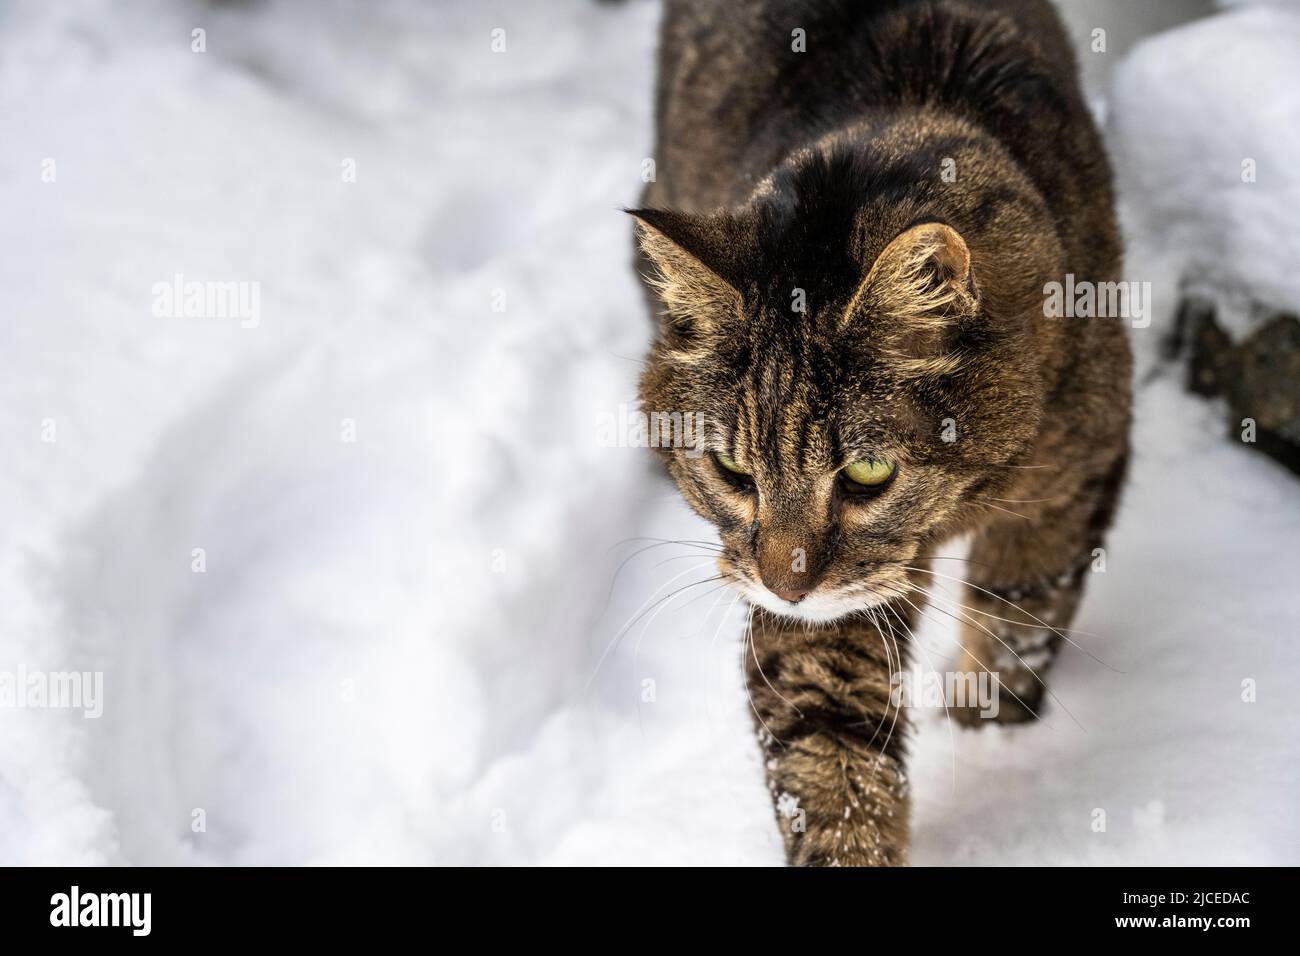 brown and black striped tabby cat walking in the snow Stock Photo